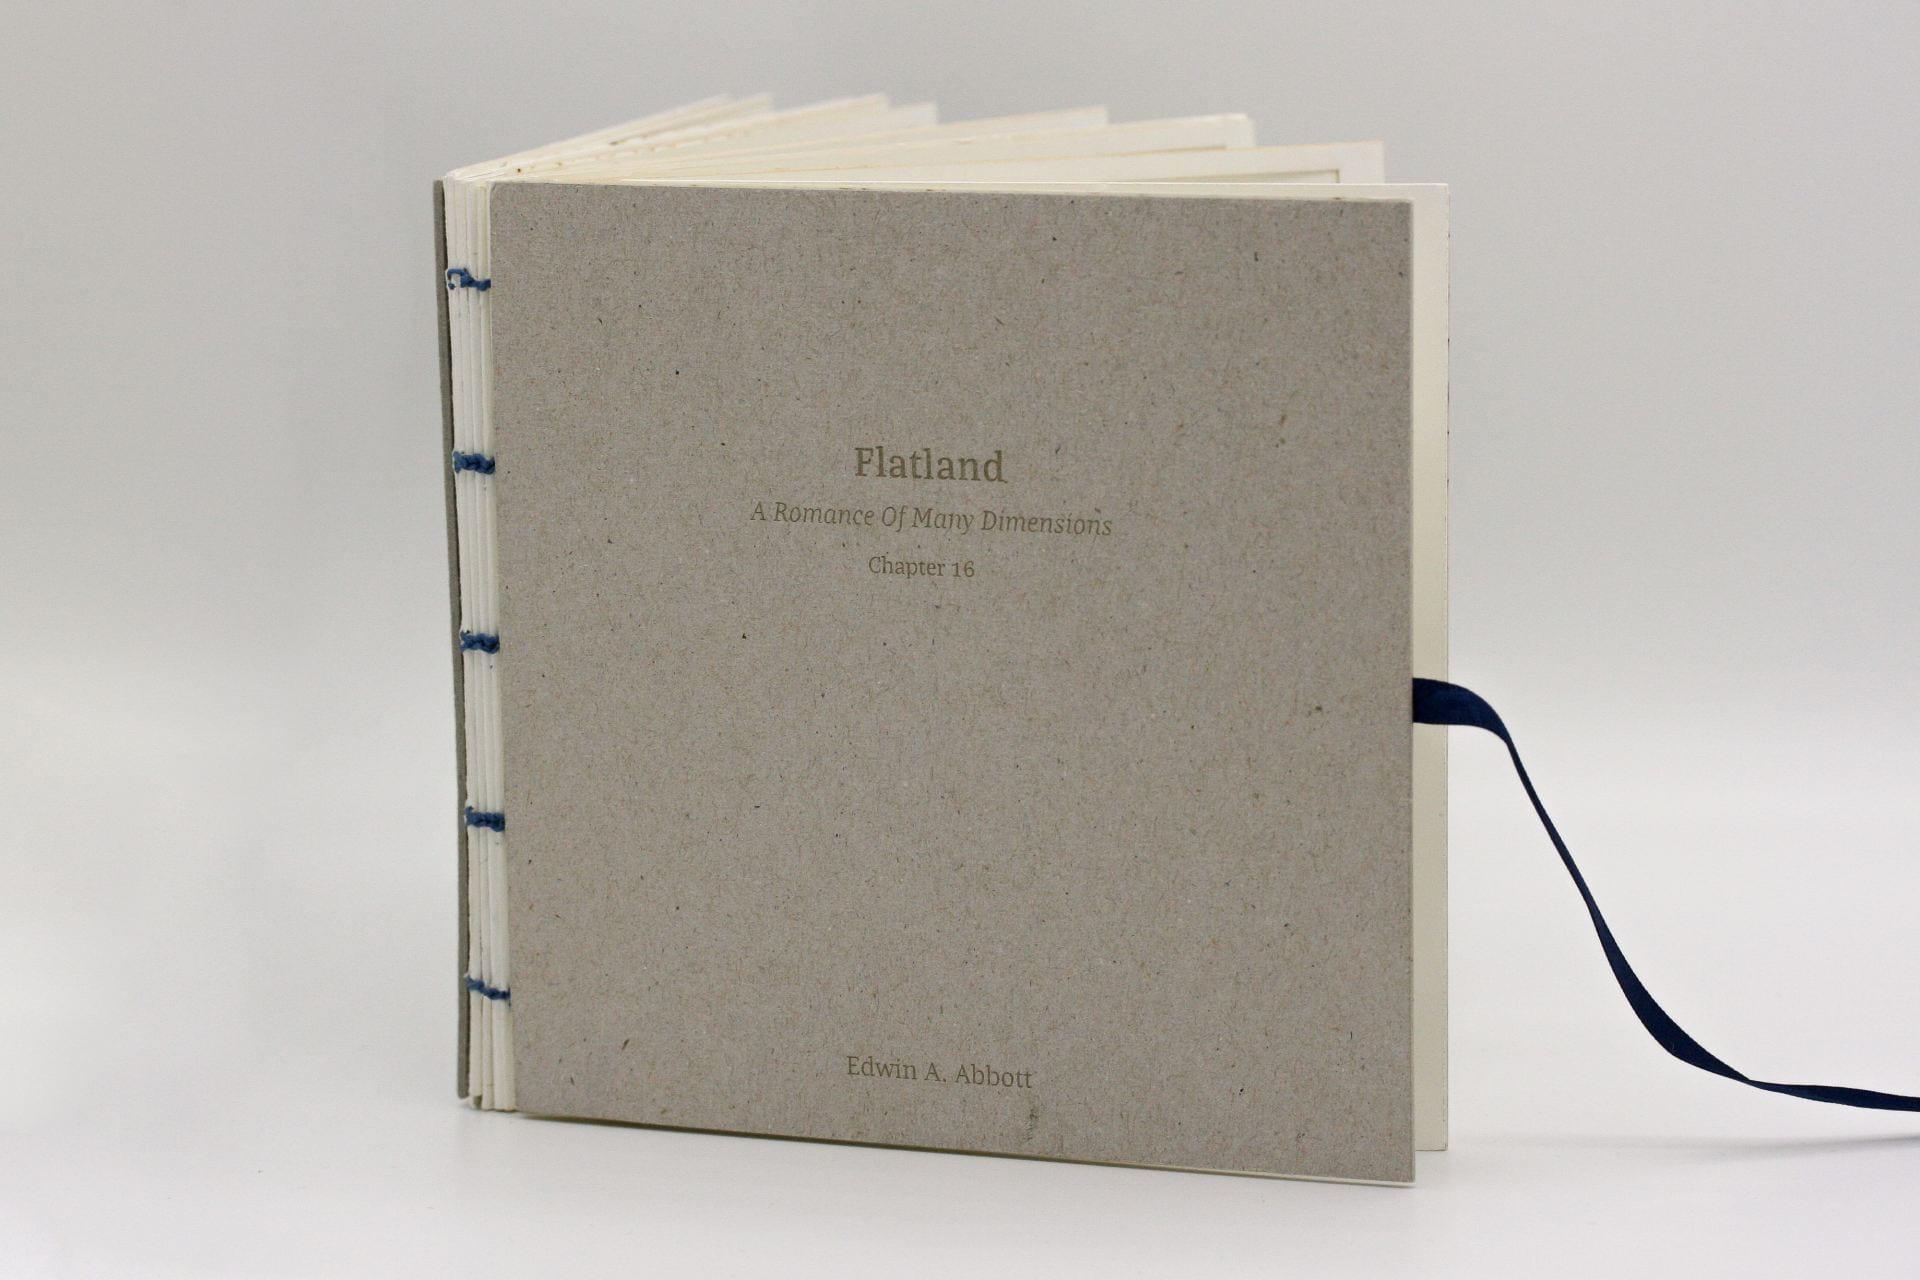 Front cover of book titled 'Flatland'.